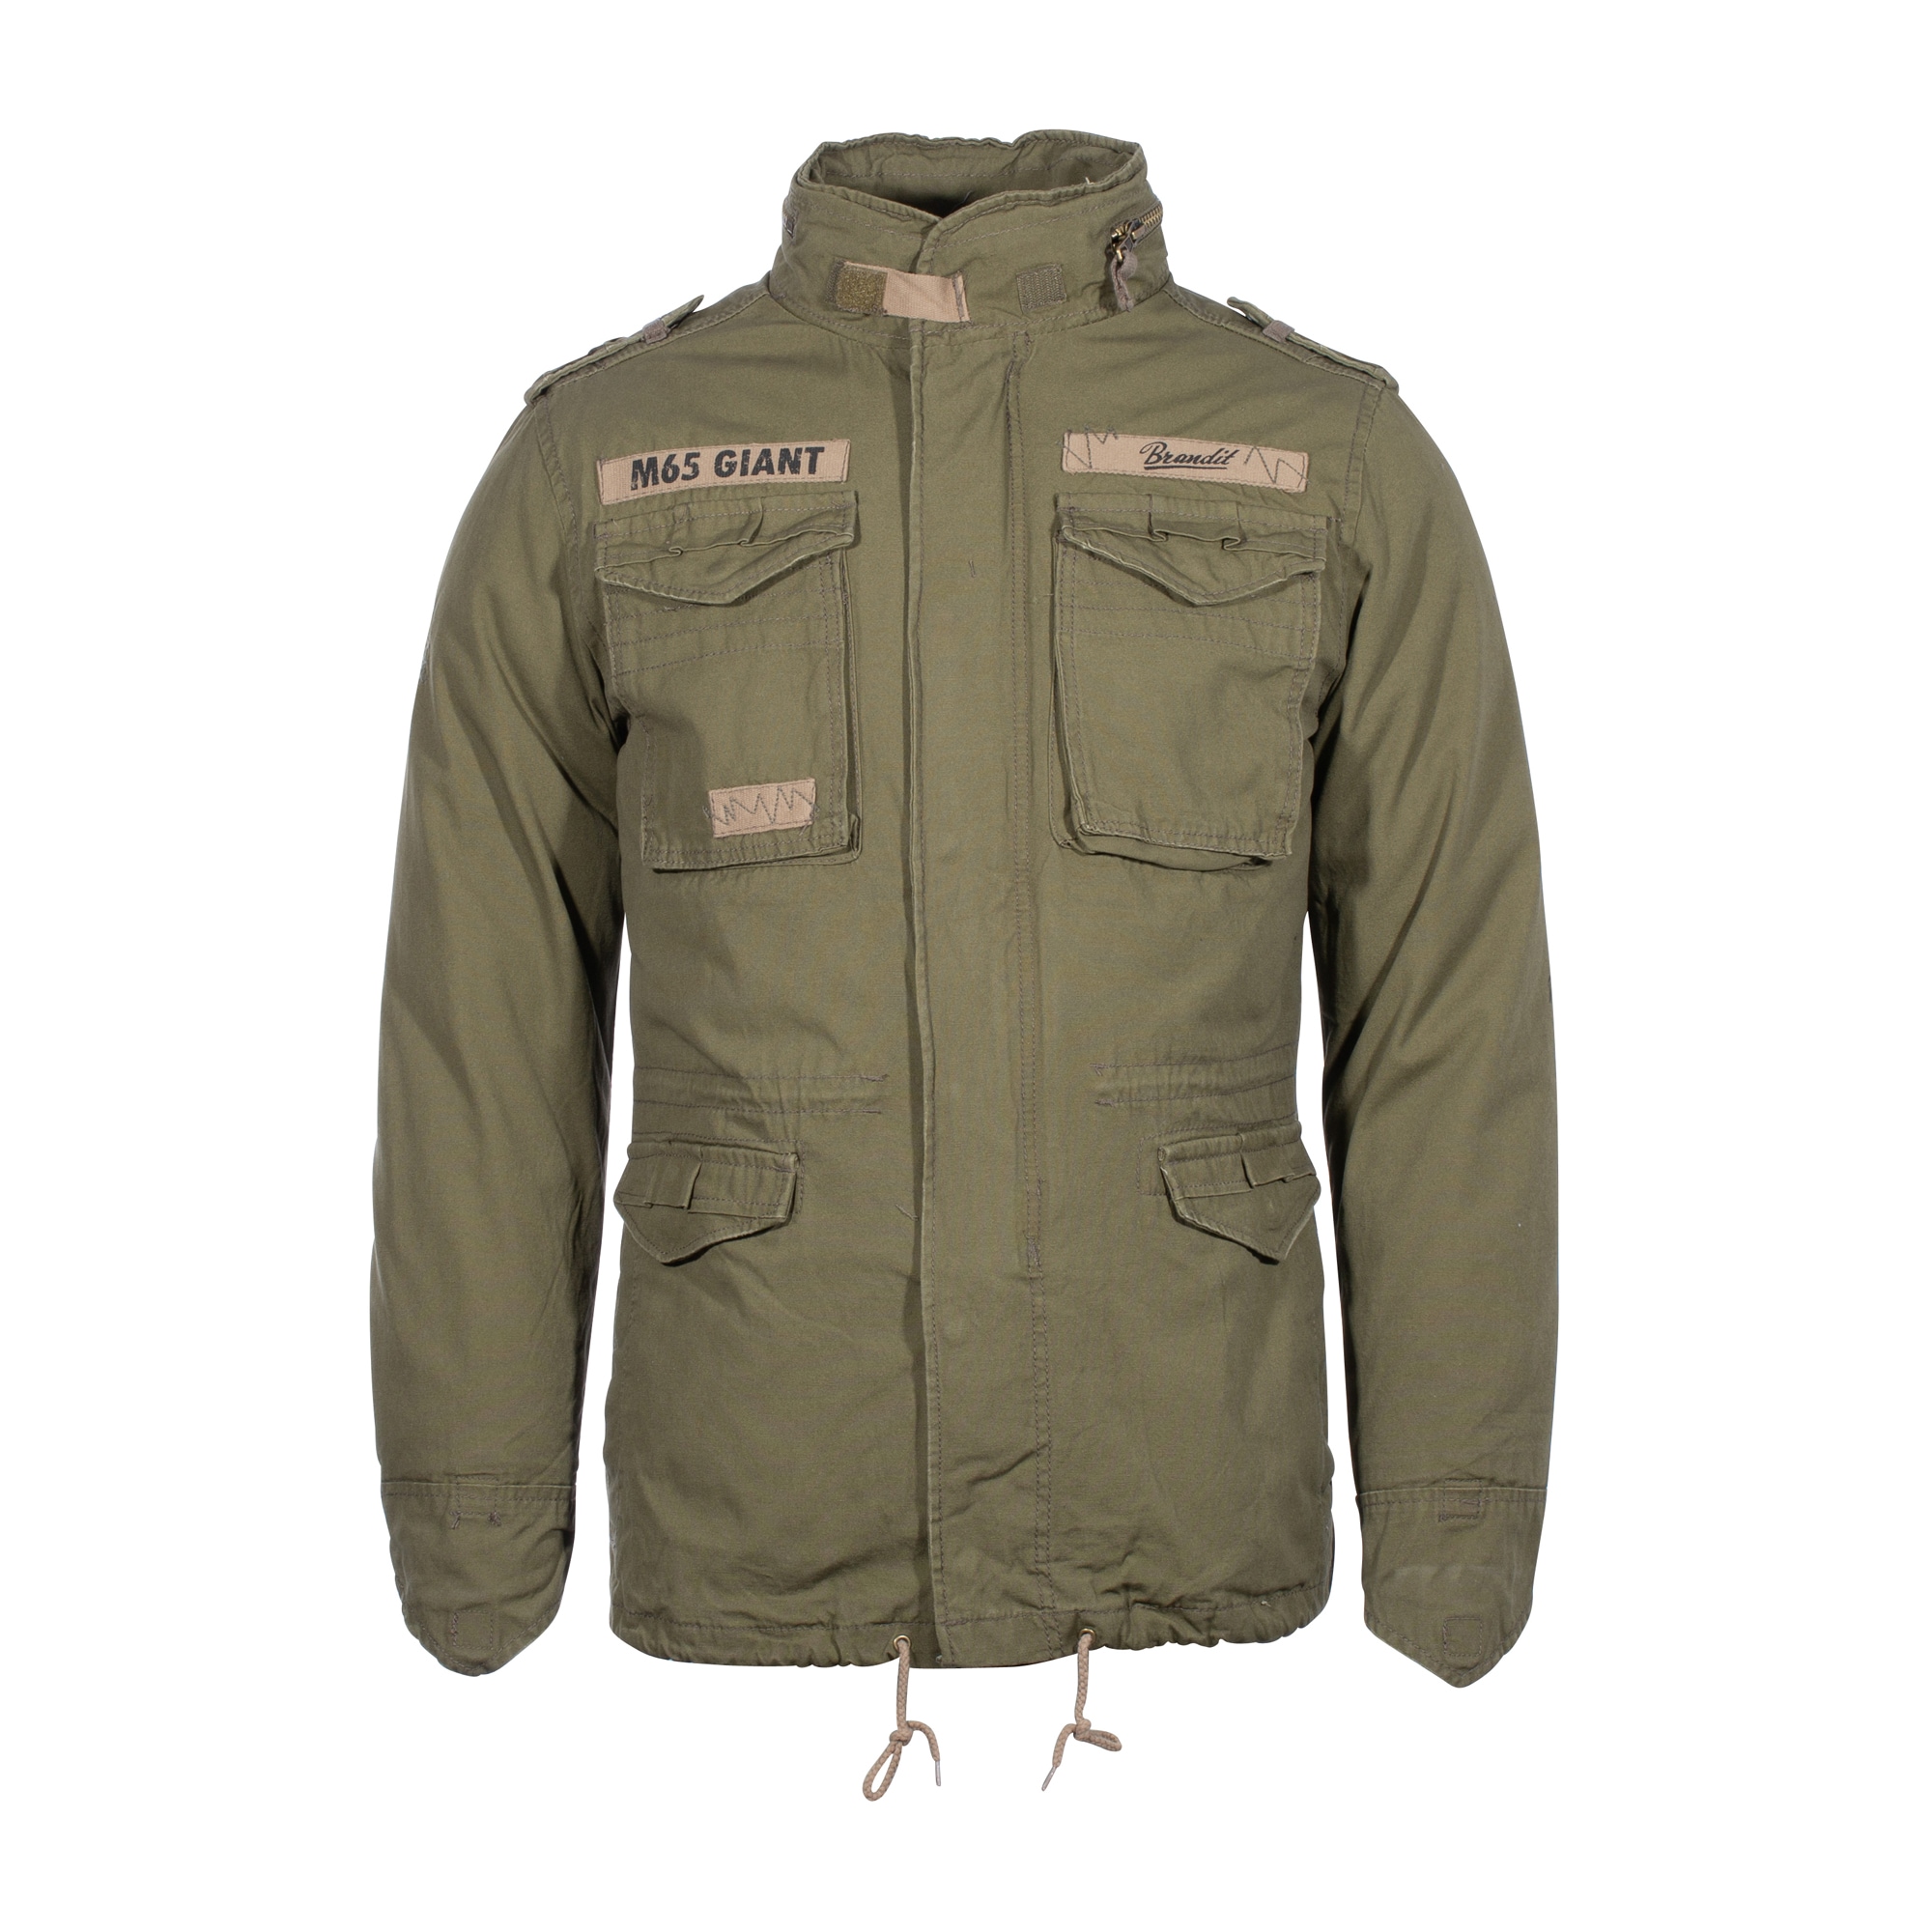 Moeras Gloed pols Purchase the Brandit Jacket M-65 Giant olive by ASMC